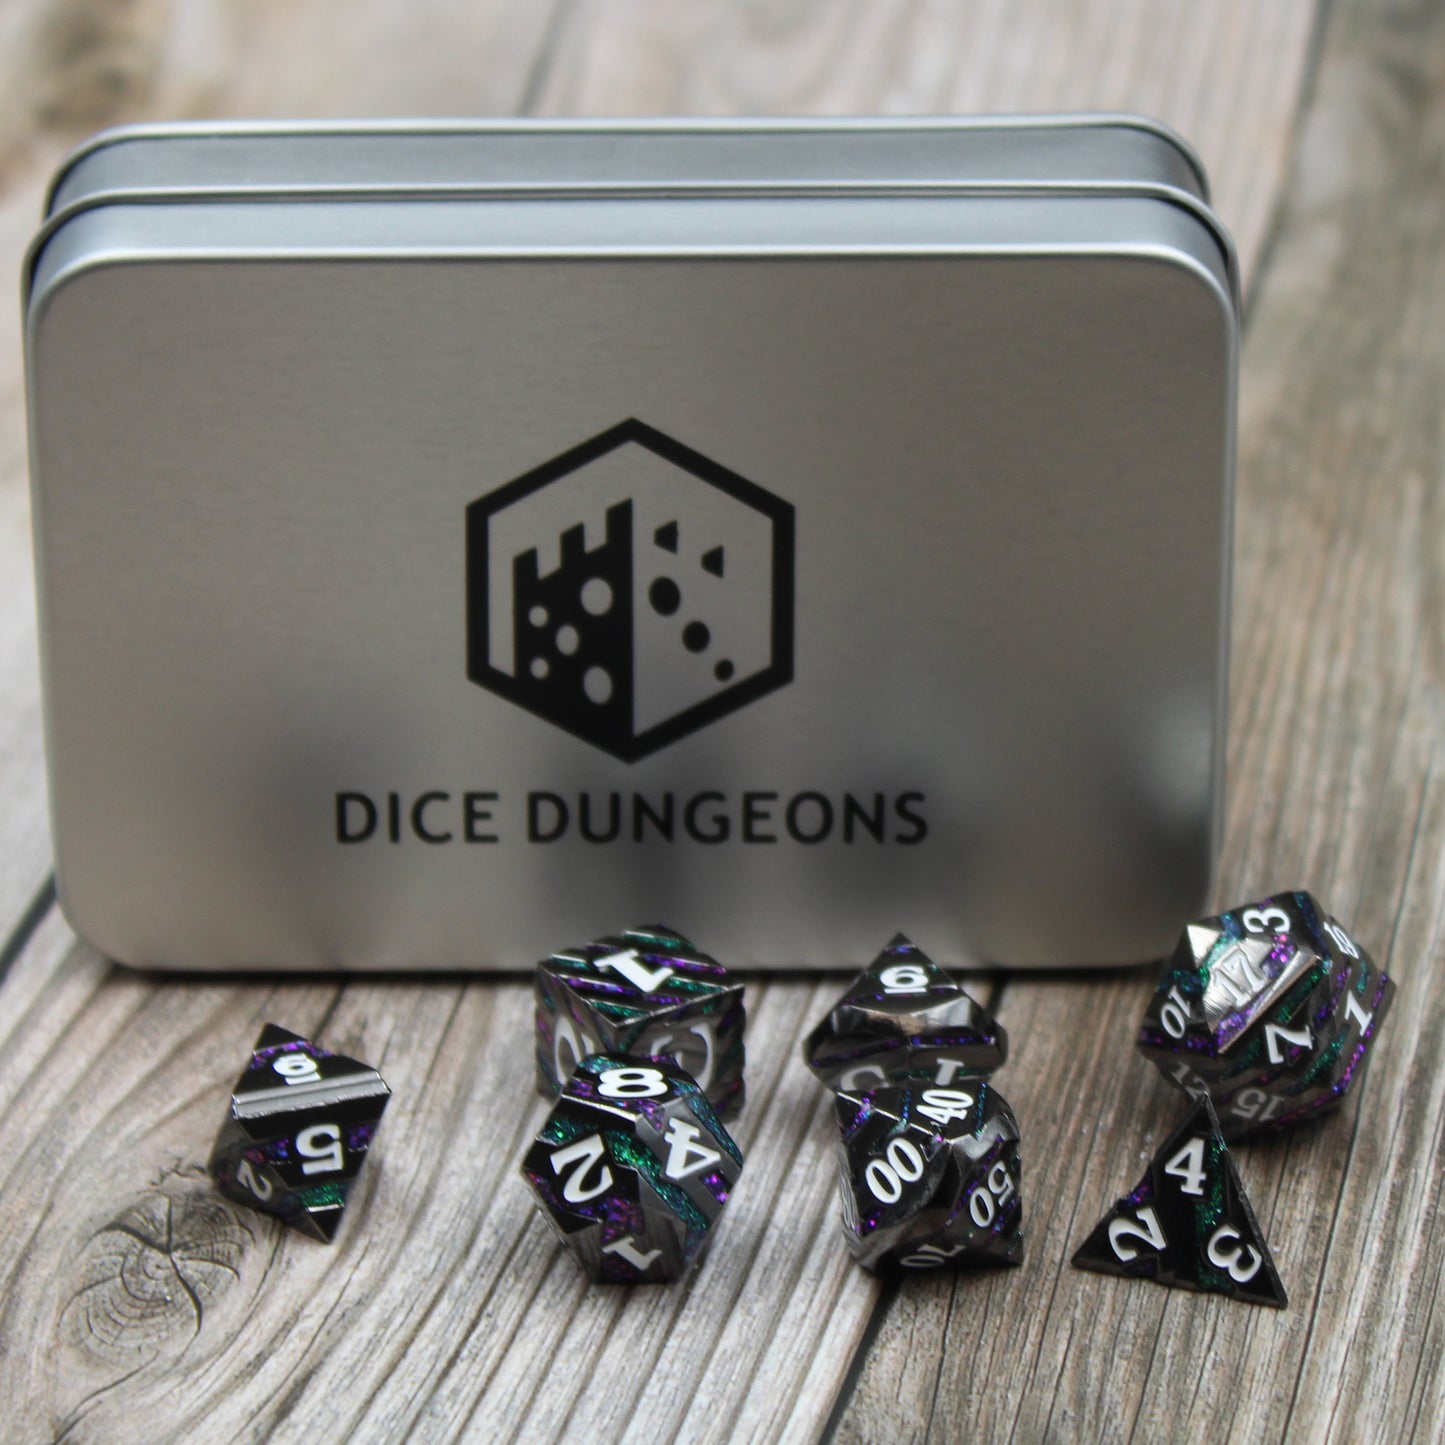 Box and dice for blakc striped metal dice.